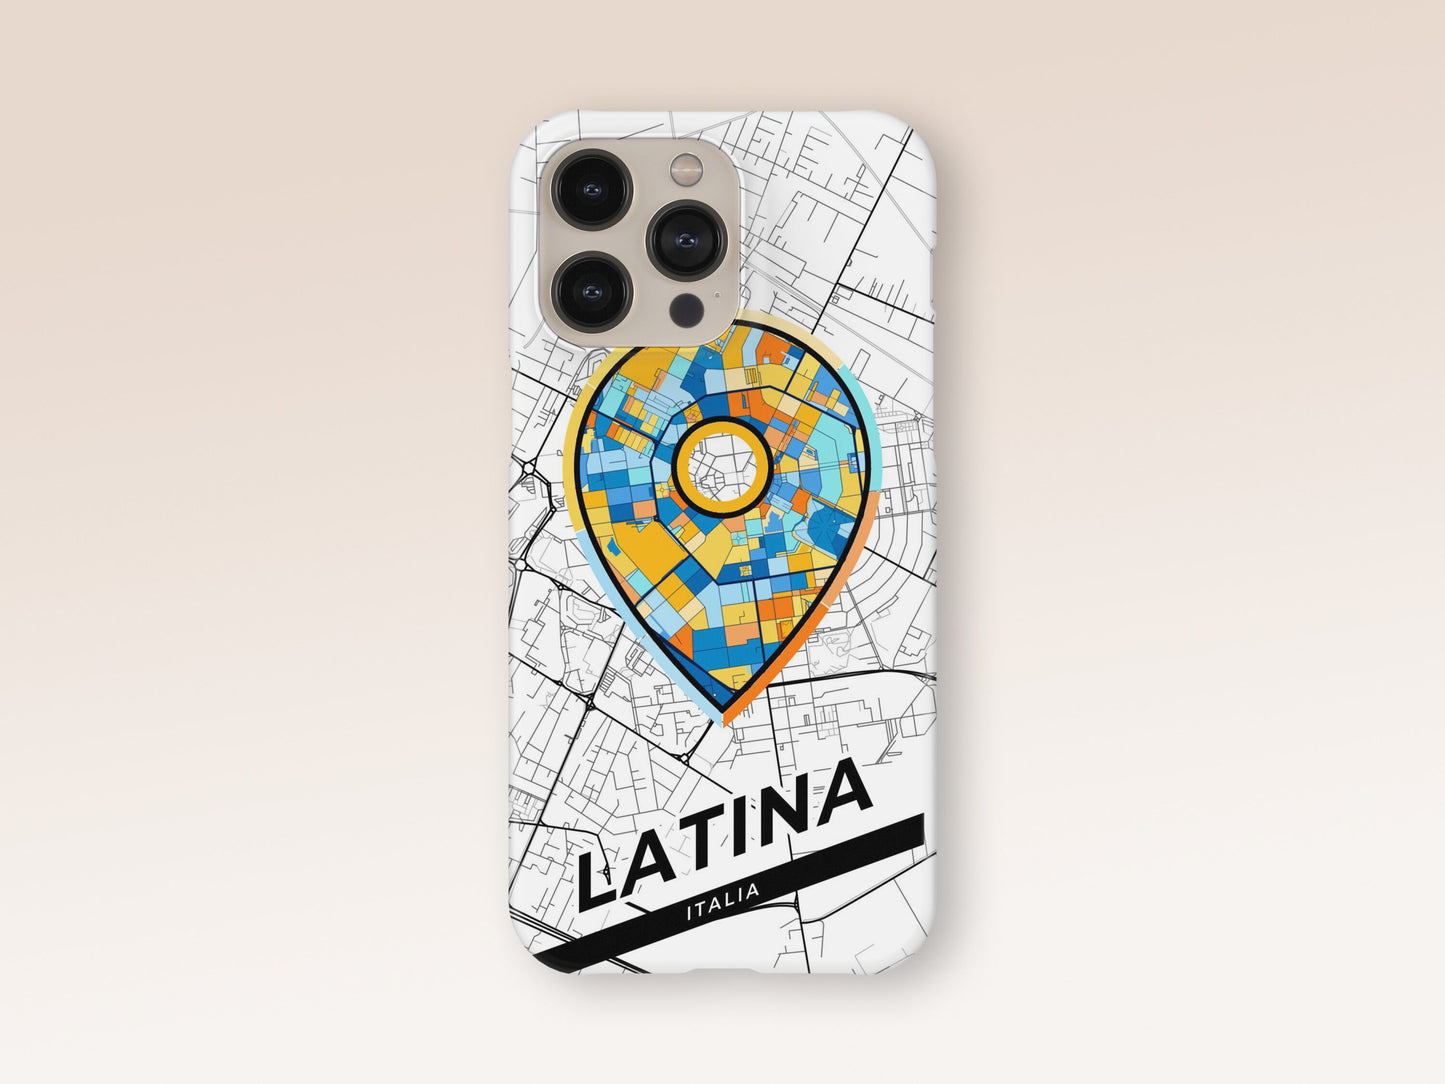 Latina Italy slim phone case with colorful icon. Birthday, wedding or housewarming gift. Couple match cases. 1